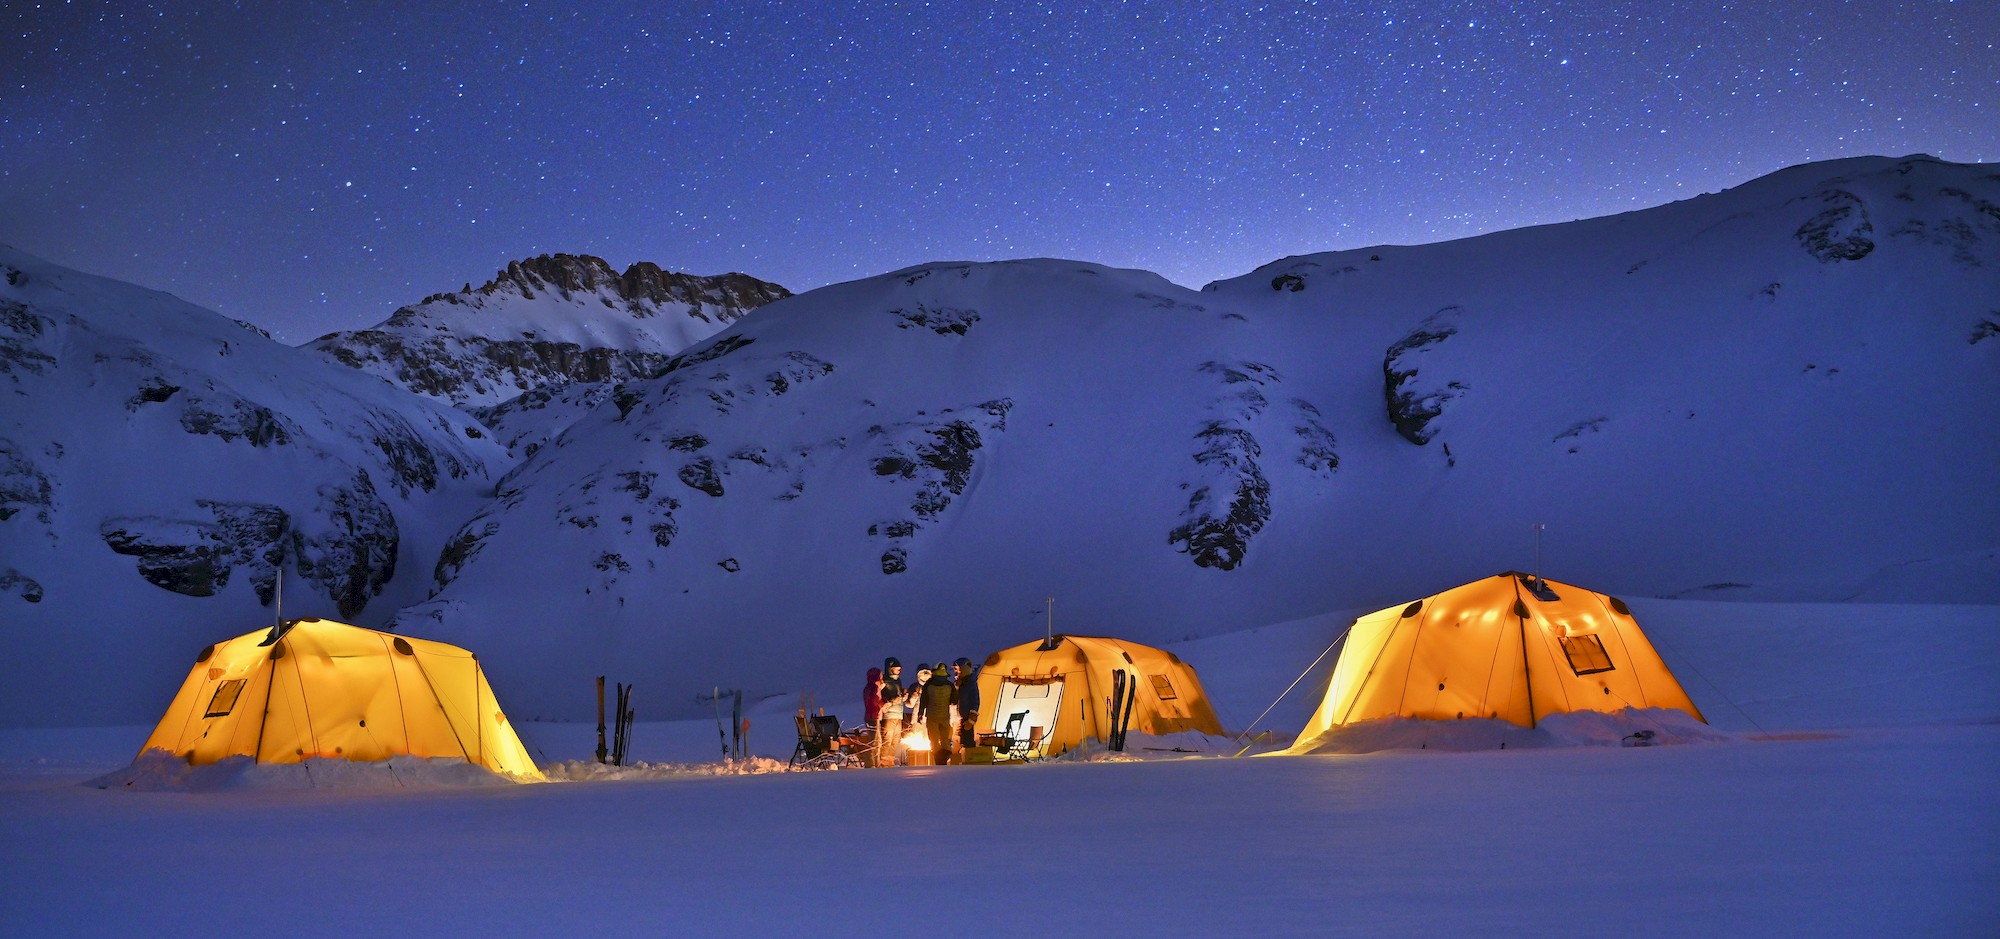 Helitrax Launches Bridal Veil Backcountry Ski Camps Visit Telluride